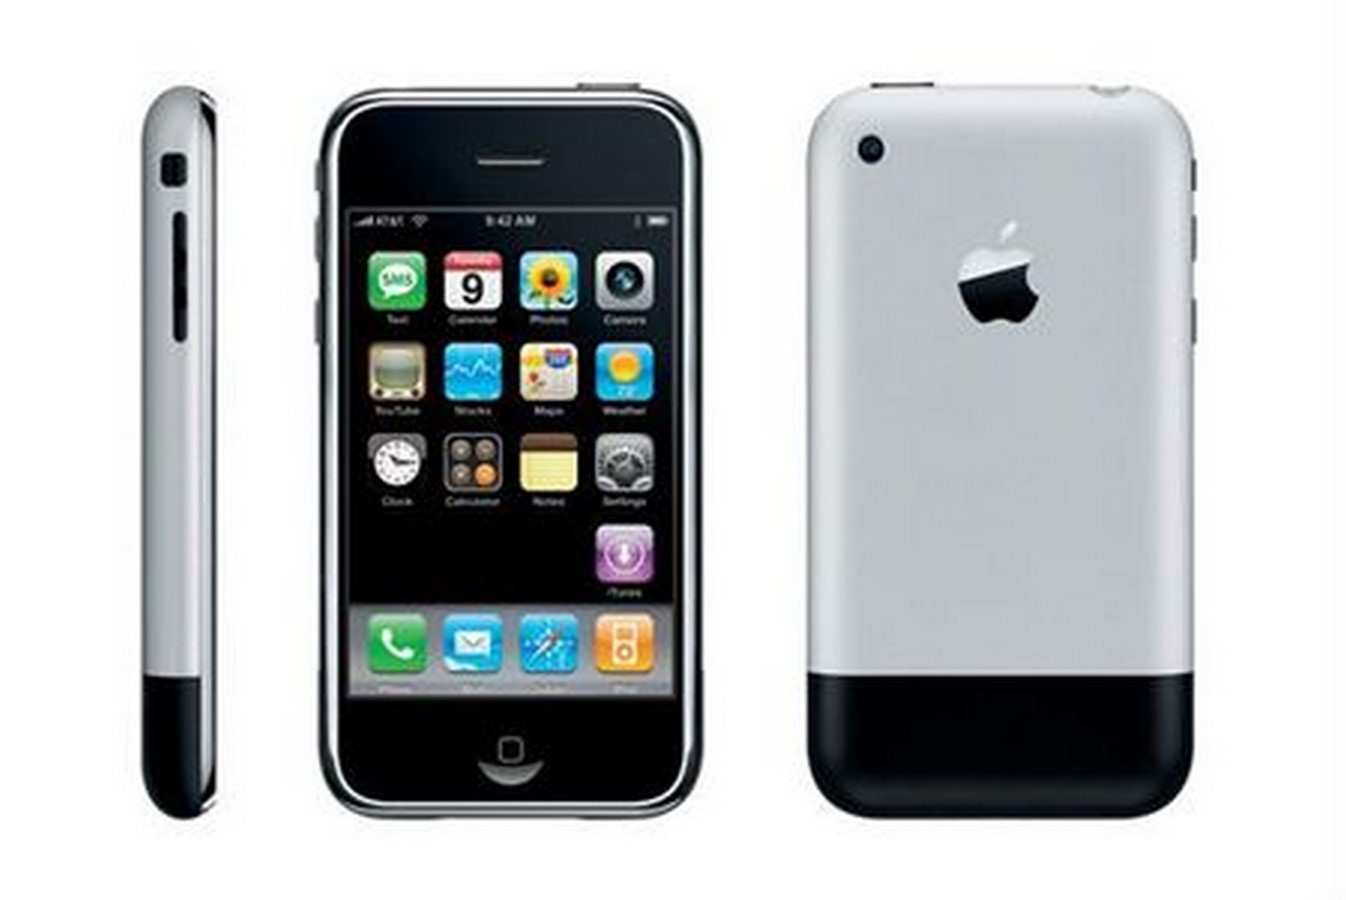 The iPhone 2007 _©https://www.wired.com